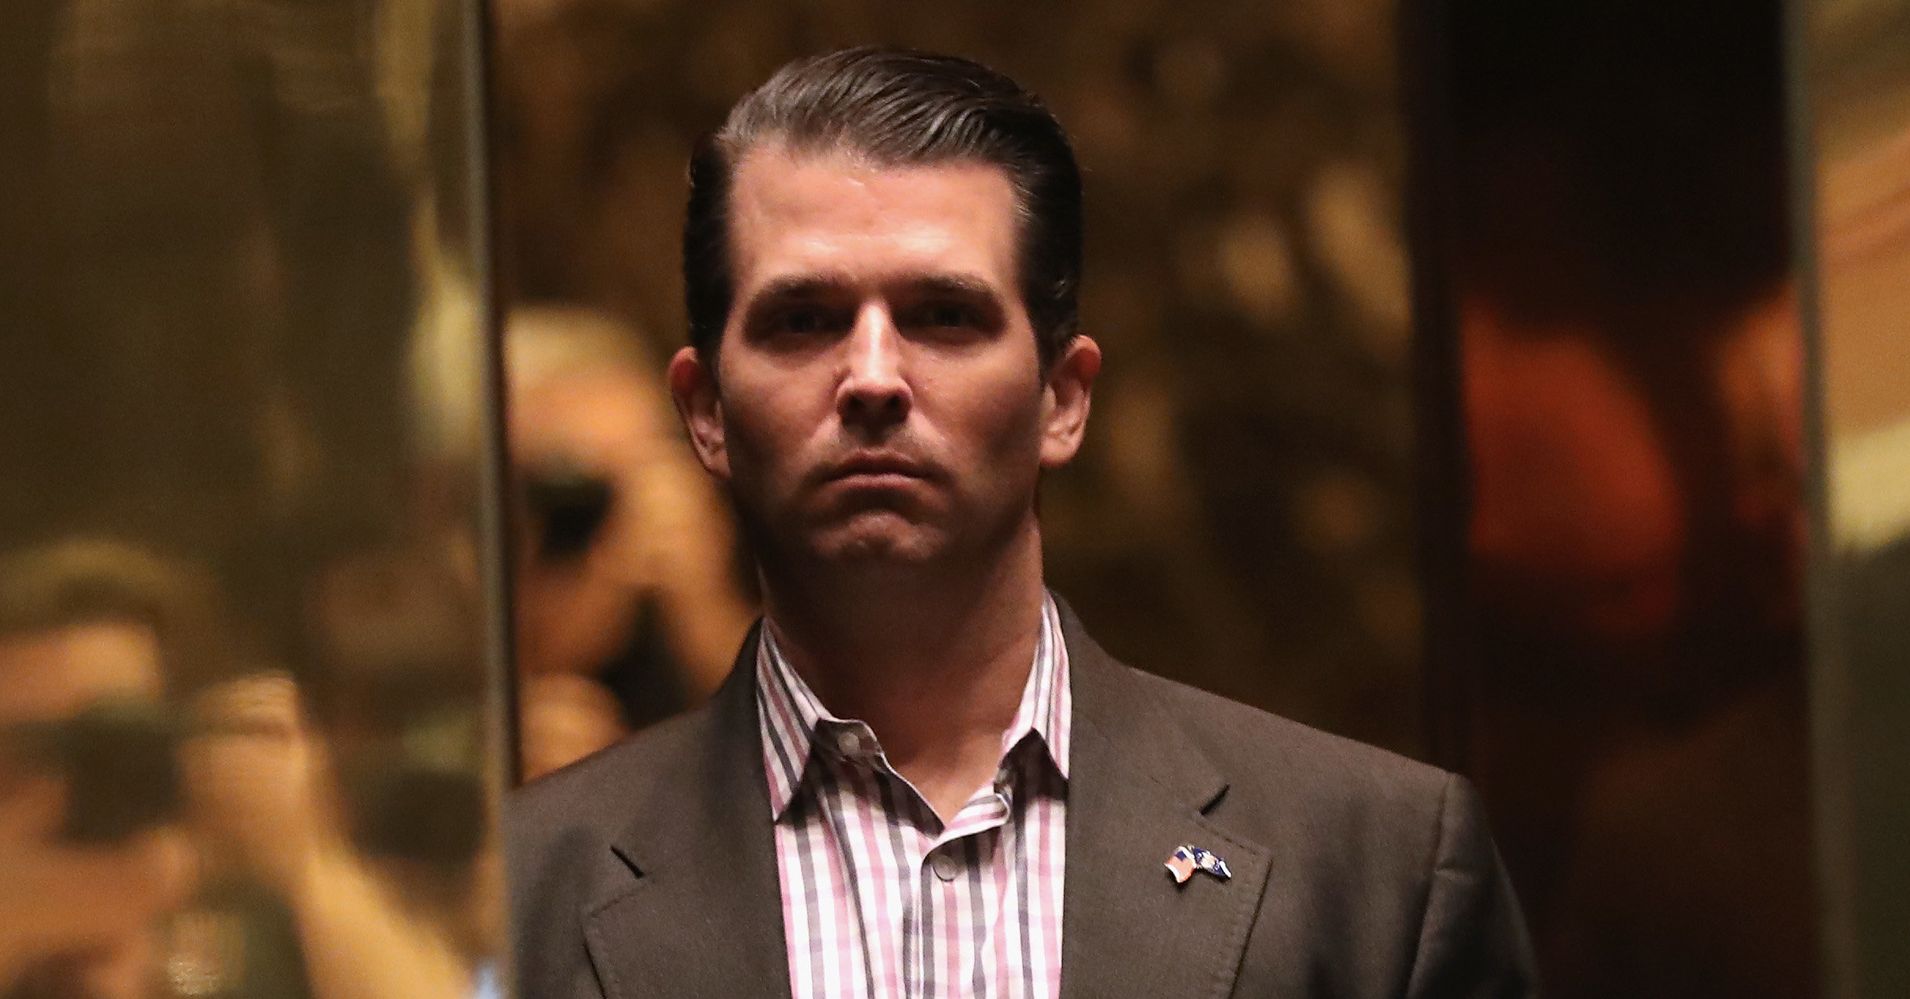 Trump Jr. Has Broken The Law. It's Time For Enforcement Action. | HuffPost